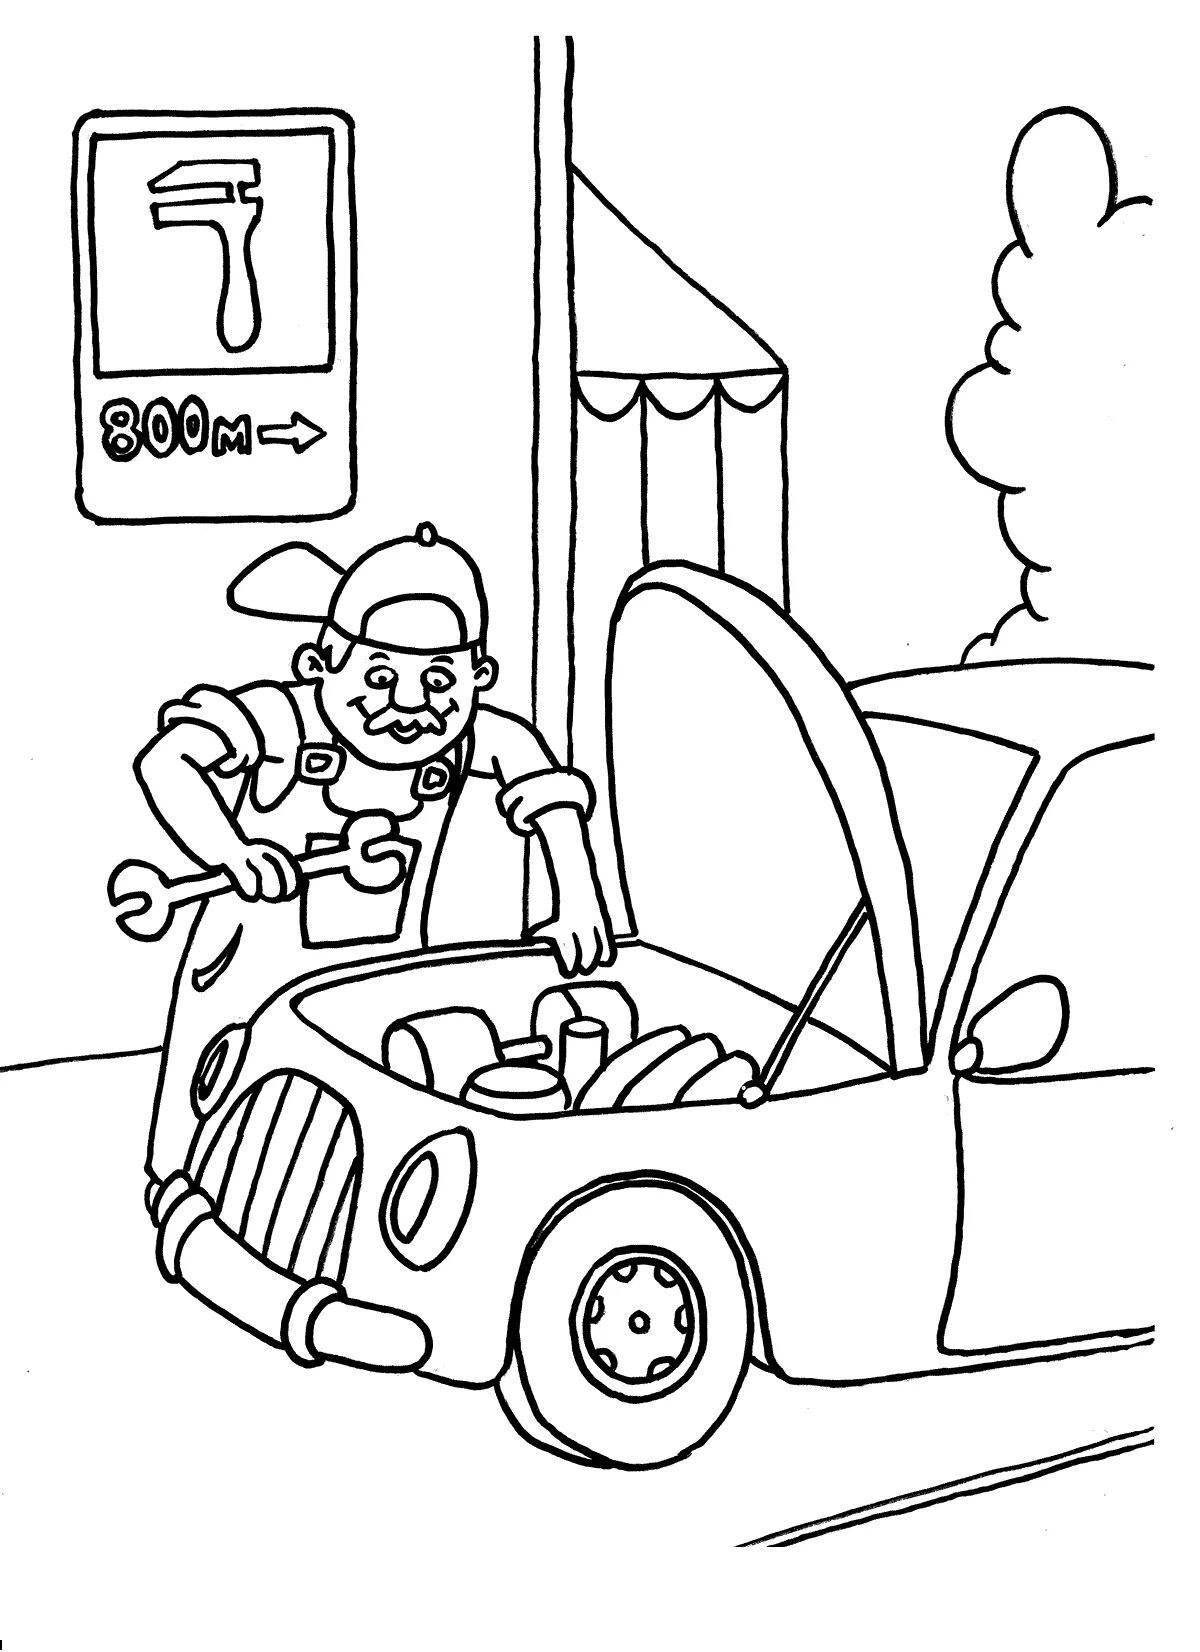 Colorful auto mechanic profession coloring page